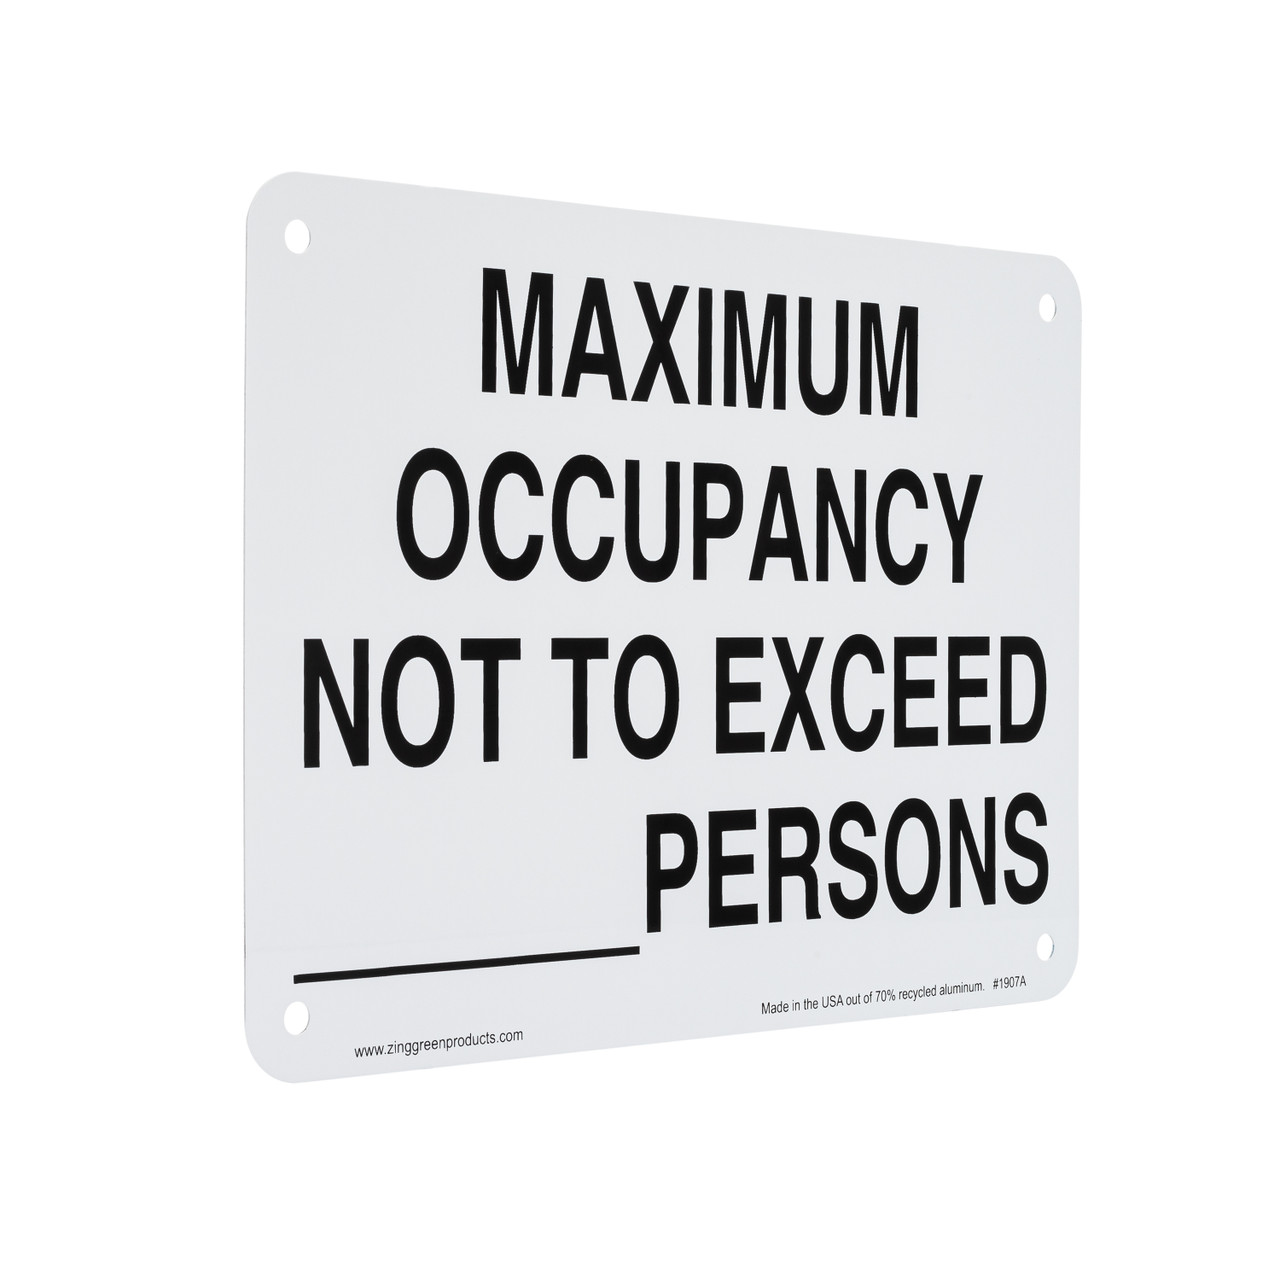 Maximum Occupancy Not to exceed blank persons sign.